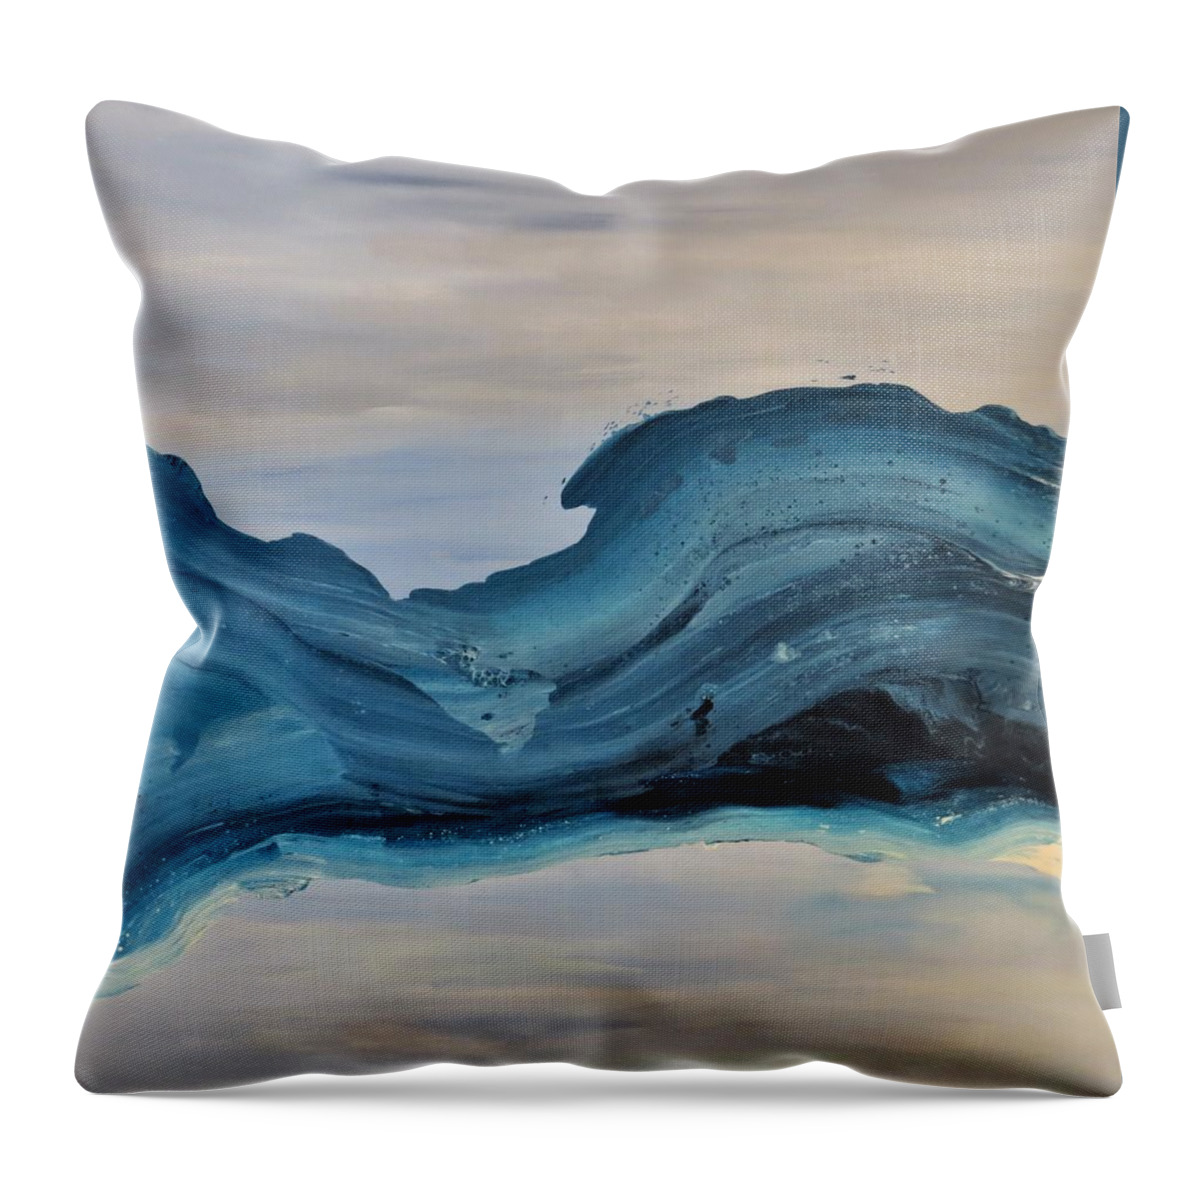 Abstract Throw Pillow featuring the painting Inertia by Soraya Silvestri